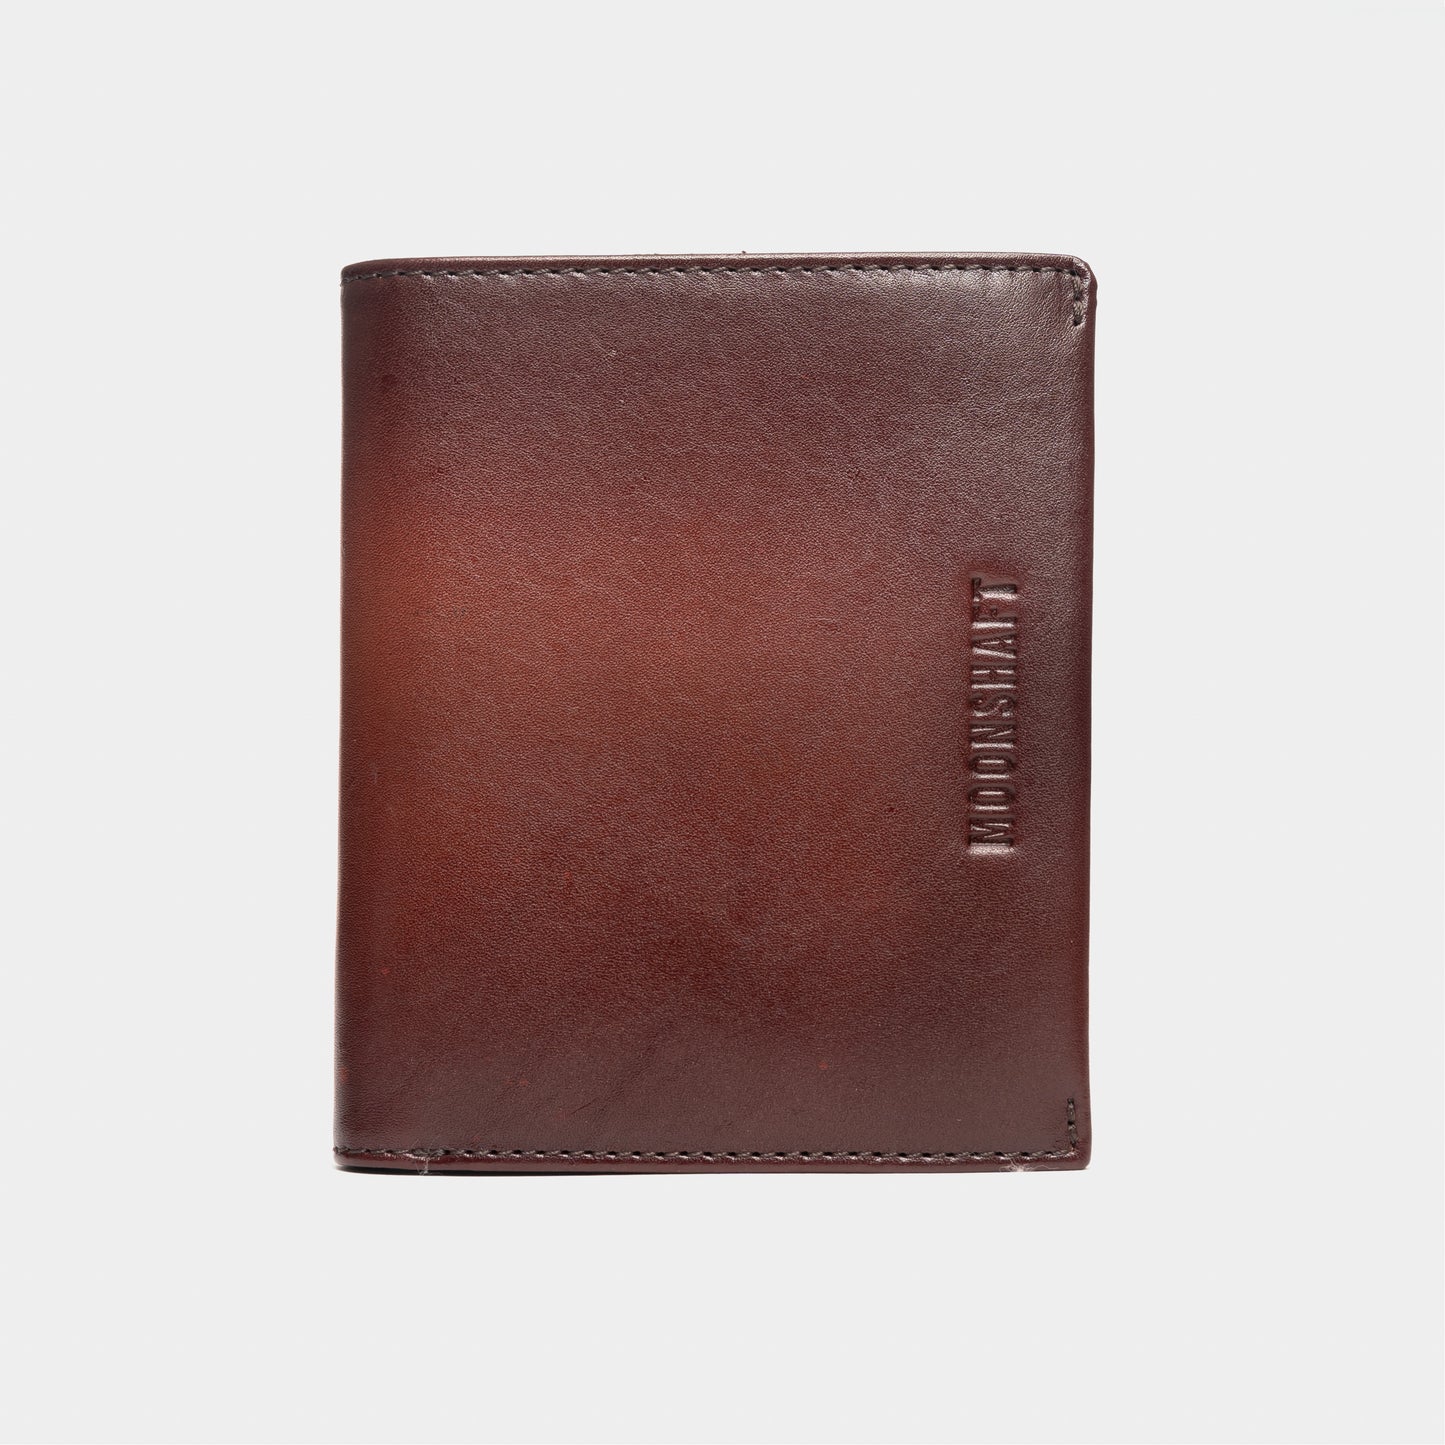 Moonshaft Compact Trifold in Maroon